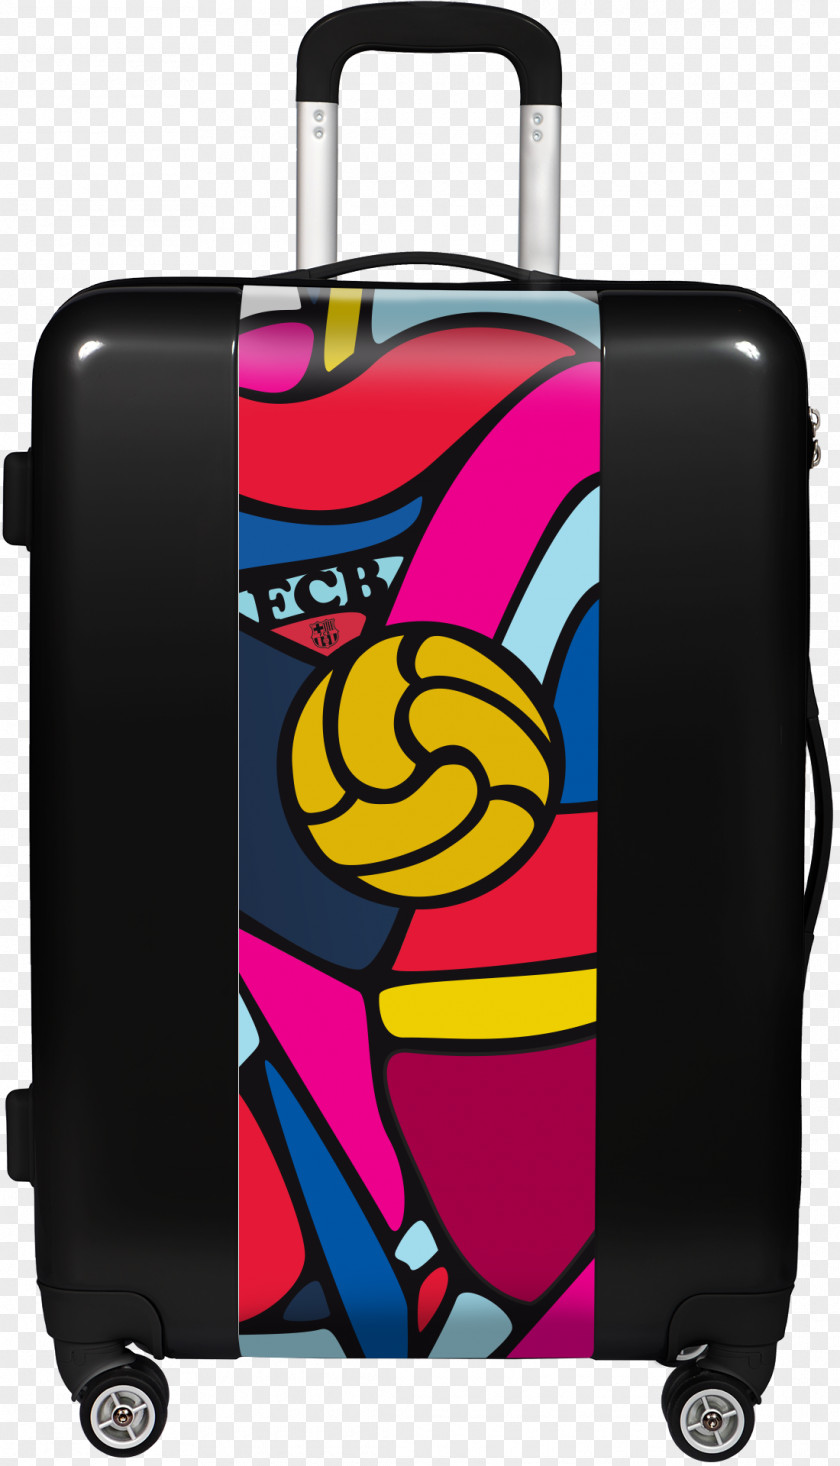 Traveler With Suitcase Hand Luggage Travel Baggage PNG